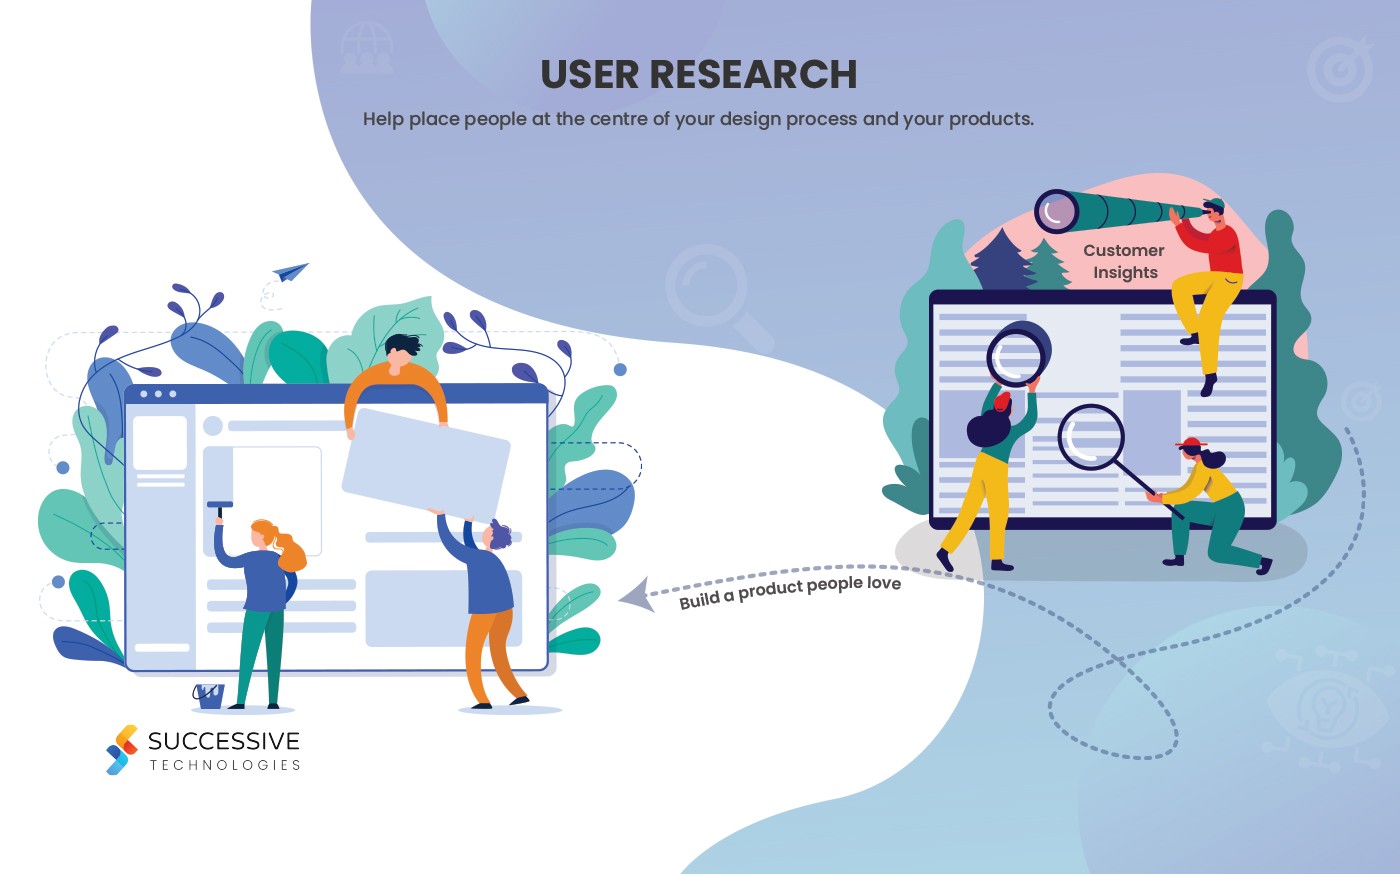 Importance of User Research